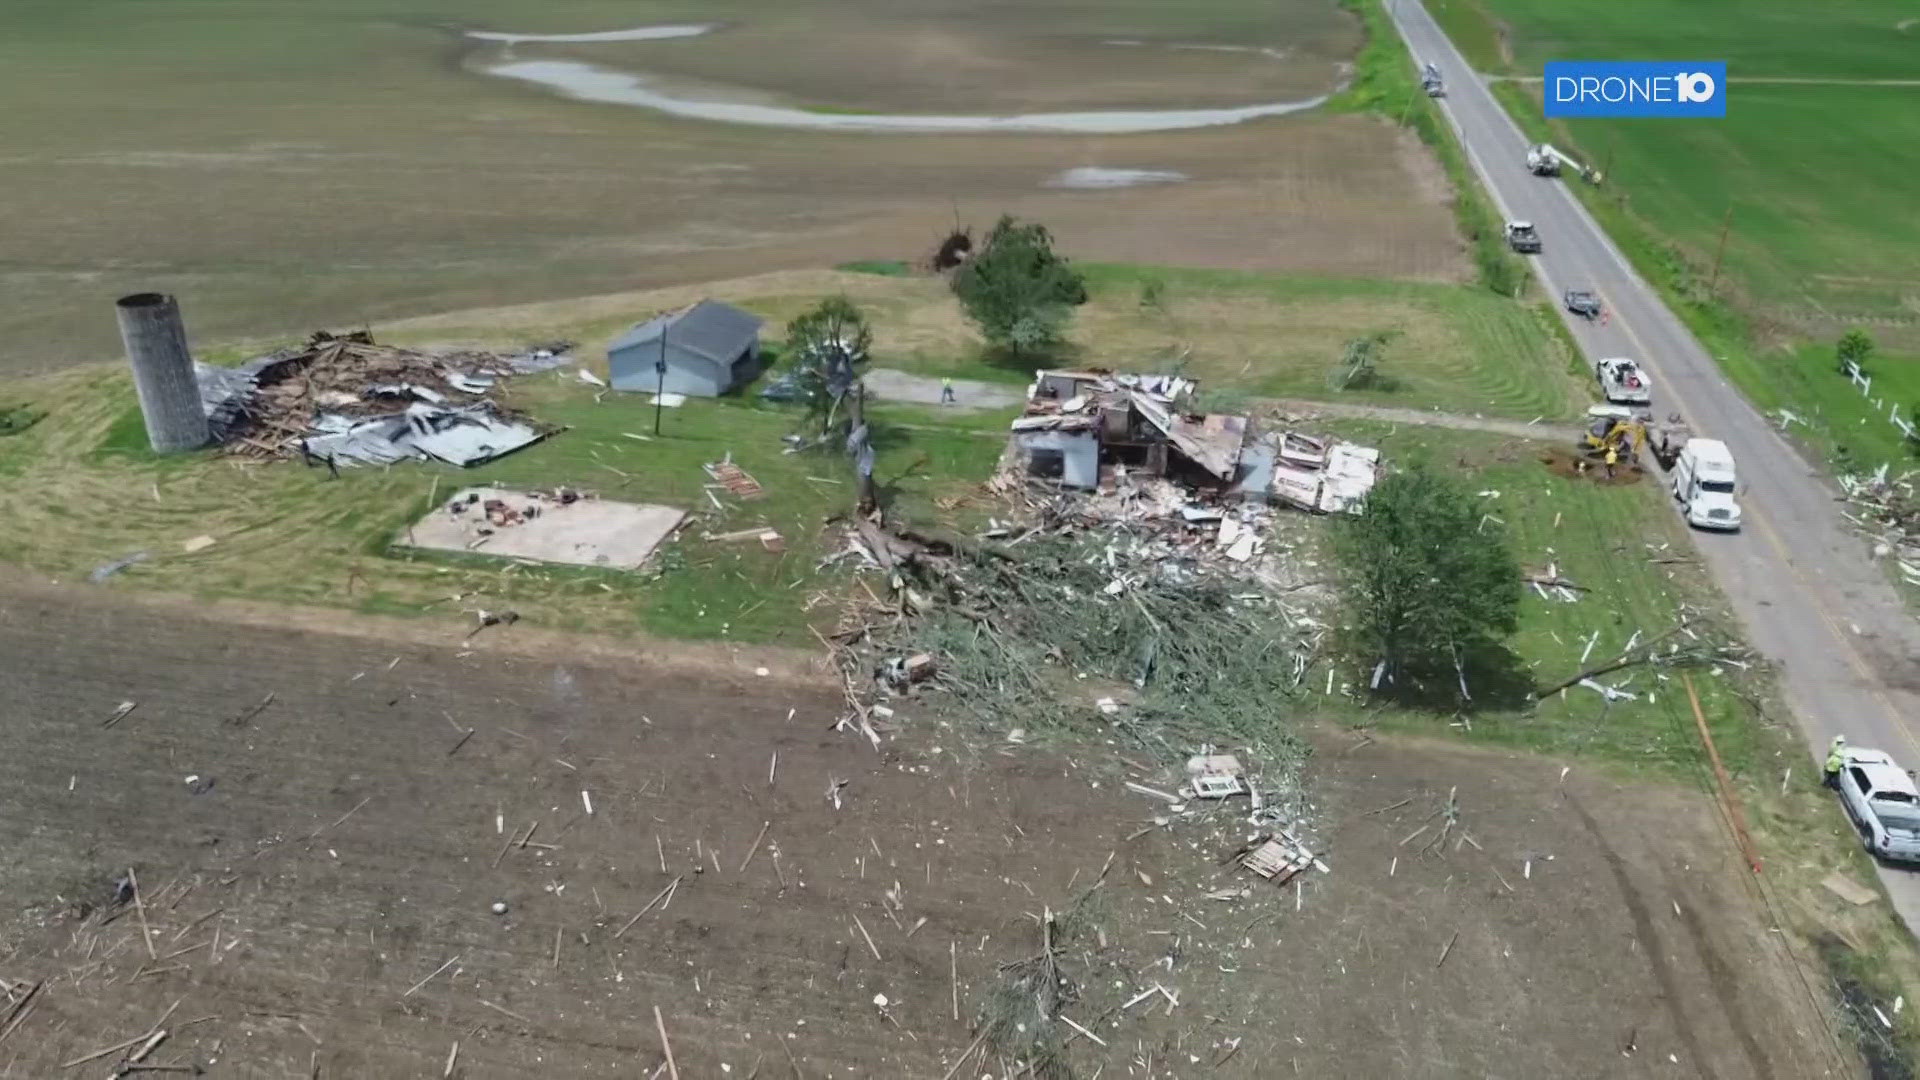 The tornado was on the ground for at least half a mile with wind speeds up to 120 to 130 mph, according to the NWS.